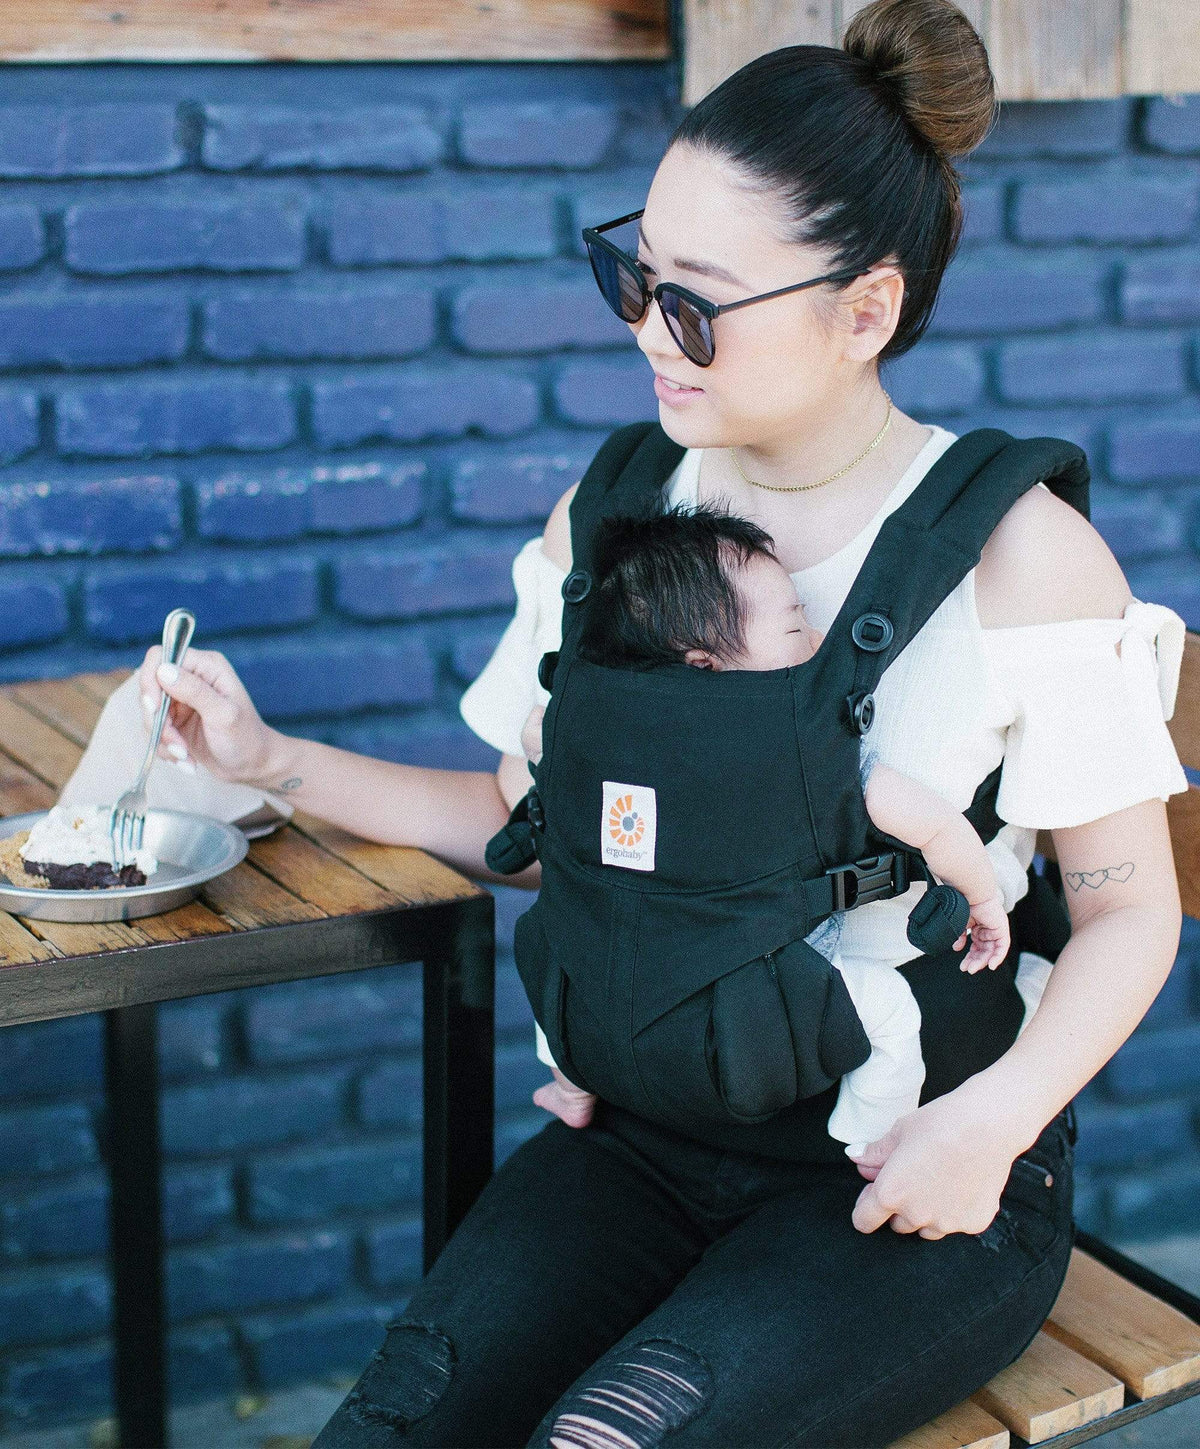 How Do I Use The Omni 360 Baby Carrier?